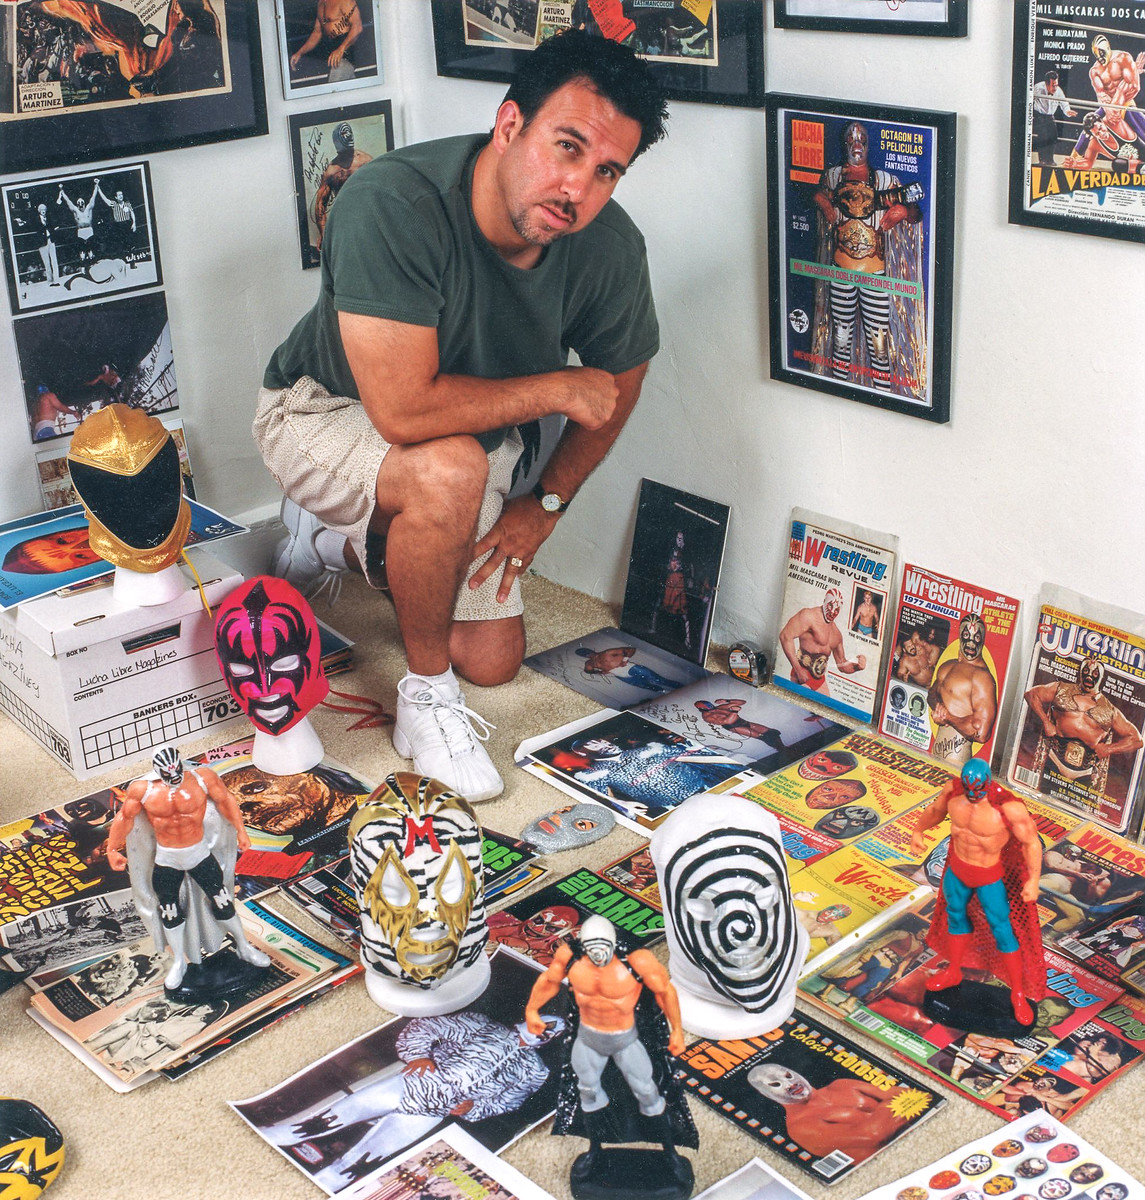 Lucha Promoter with collection